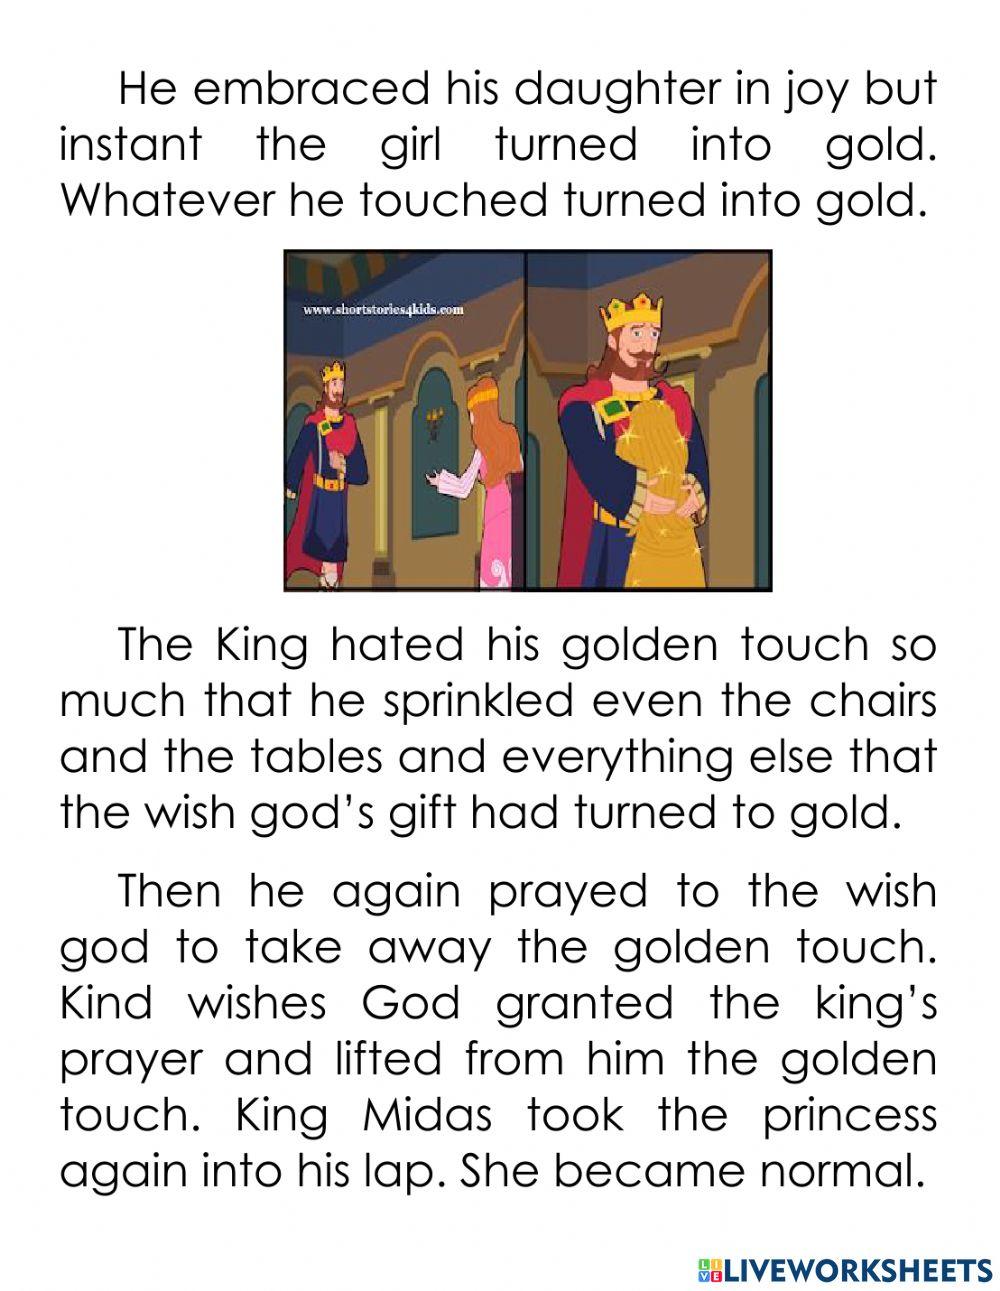 Reading Comprehension Worksheets-King Midas and the Golden Touch Google  Interactive and Printable Resources